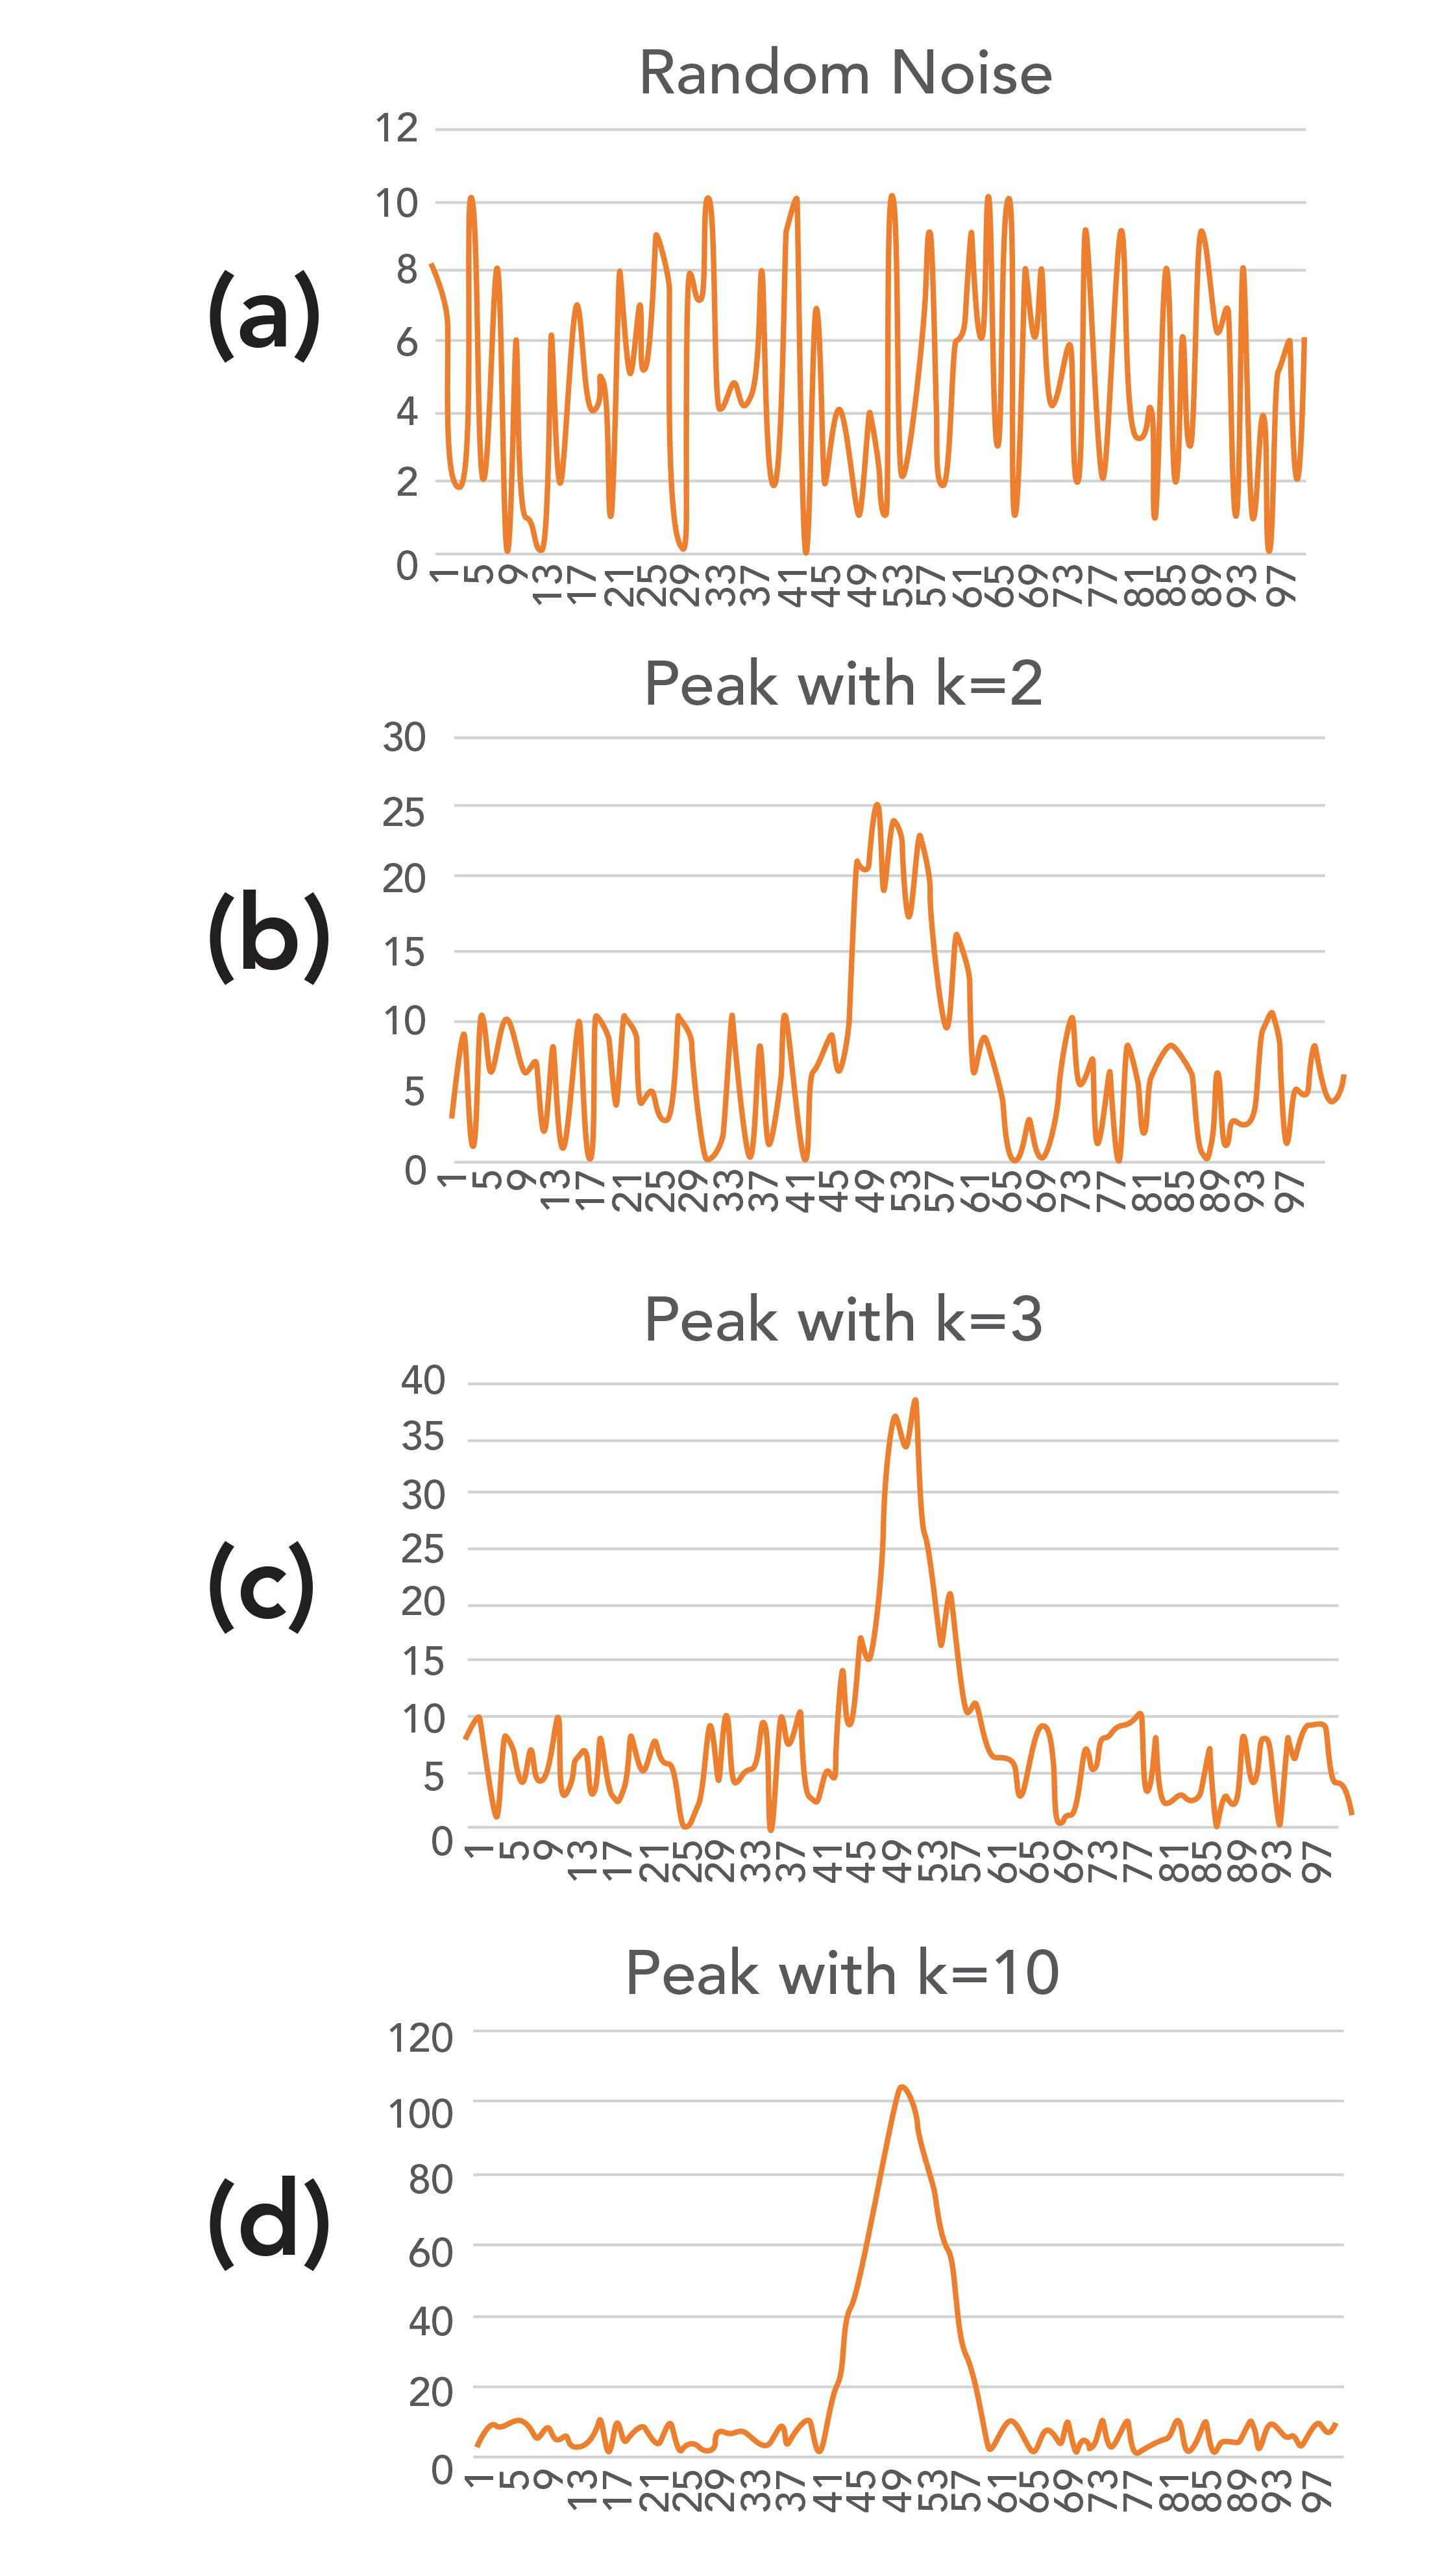 FIGURE 1: Simulated chromatograms showing noisy baselines: (a) baseline only, (b) baseline with a peak representing  k = 2, (c) baseline with a peak representing k = 3, and (d) baseline with a peak representing k = 10.